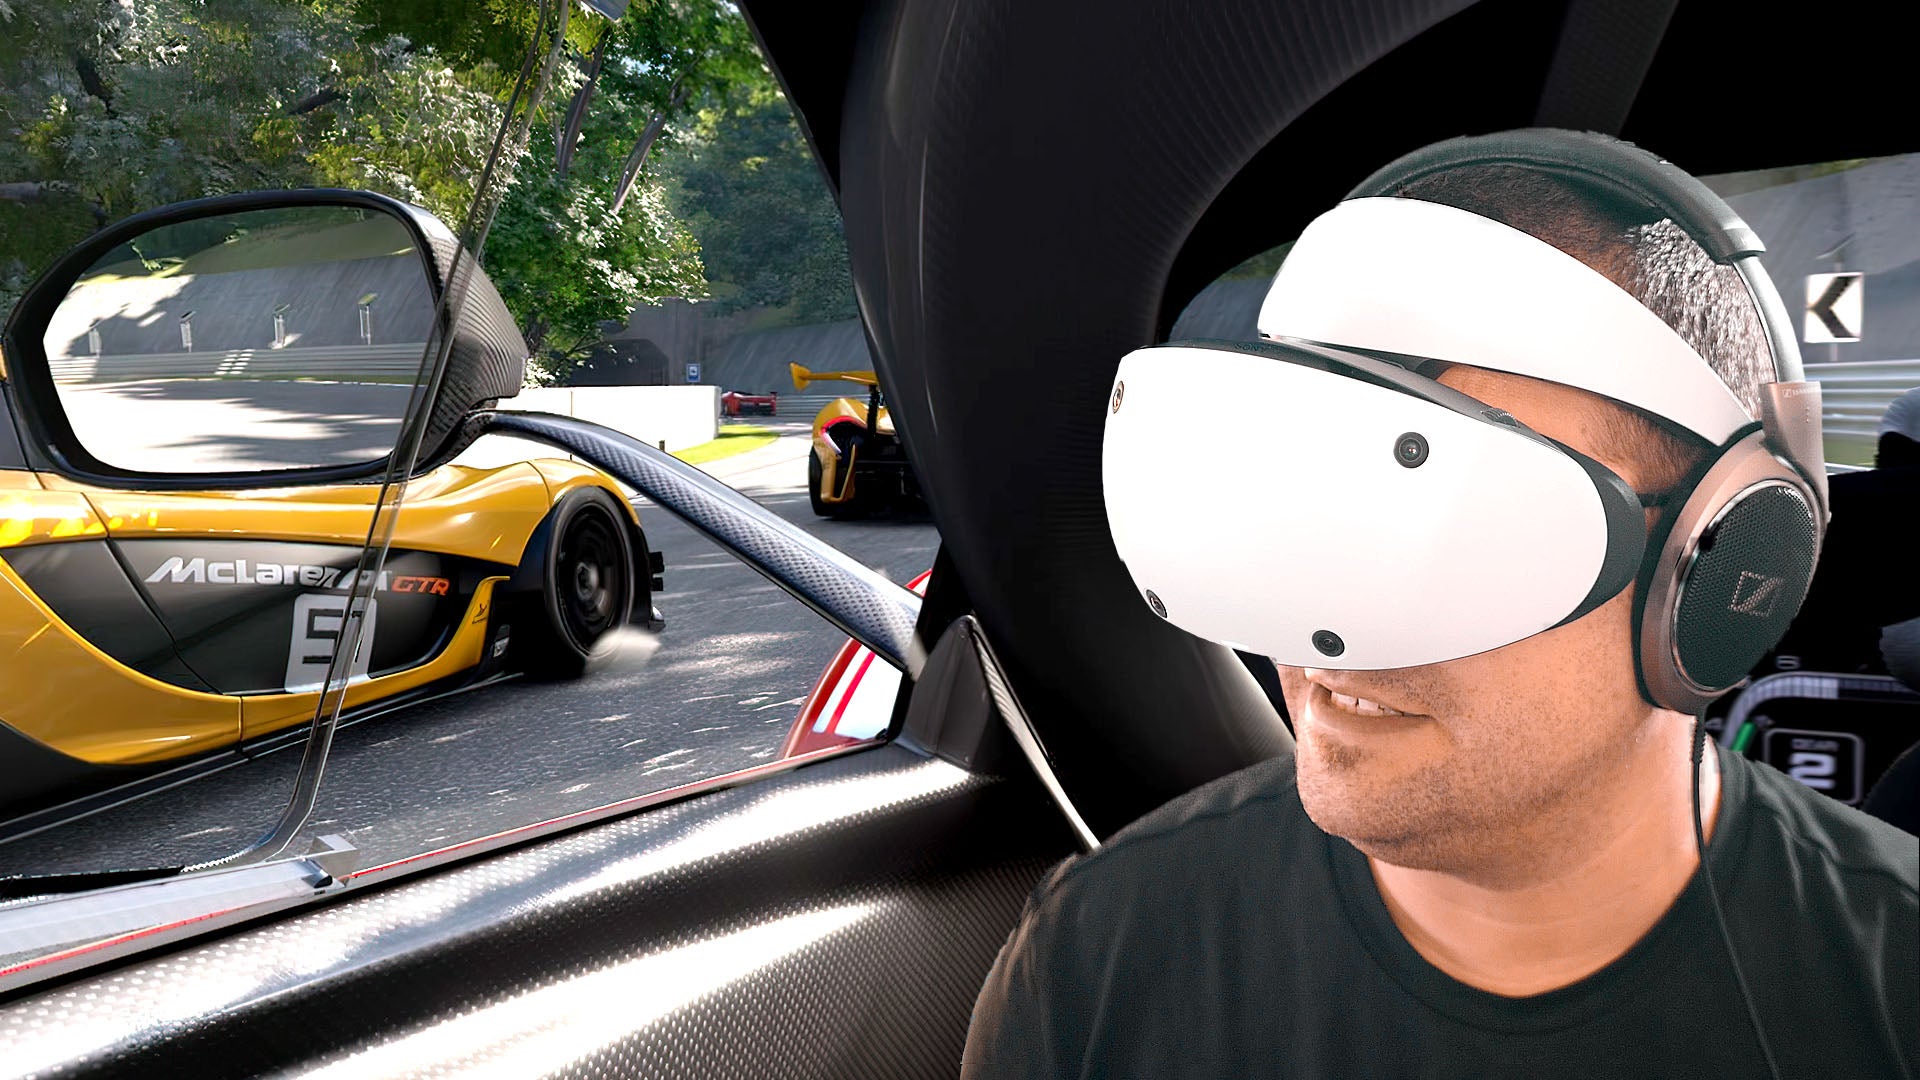 Gran Turismo 7 PSVR2 review: one of the best VR experiences on PS5